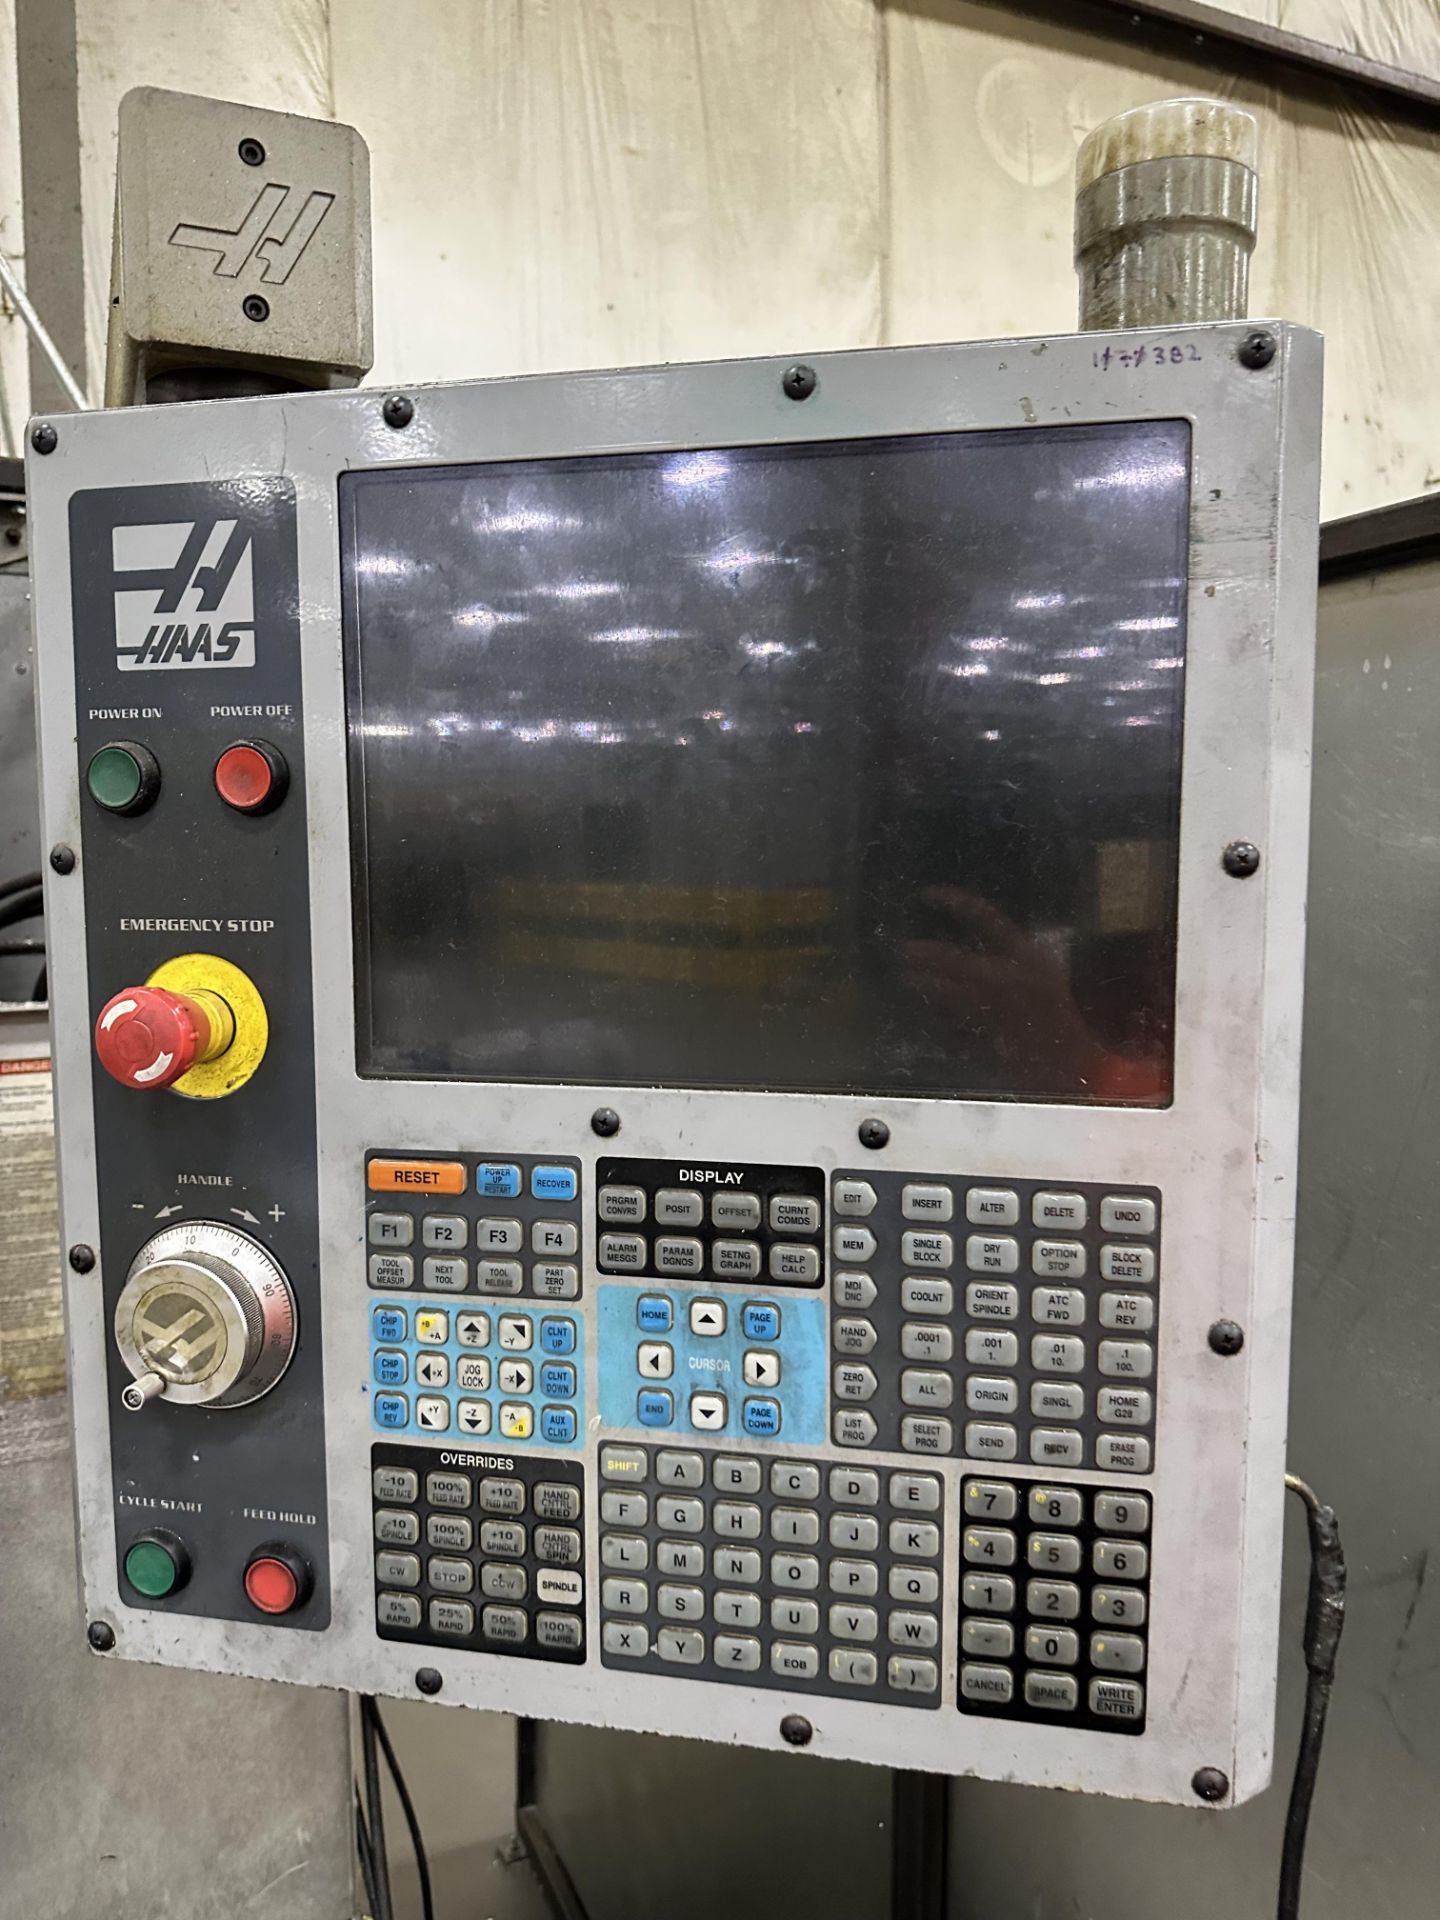 HAAS TM-1 CNC VERTICAL MACHINING CENTER.(NEW IN 2008) - Image 8 of 9